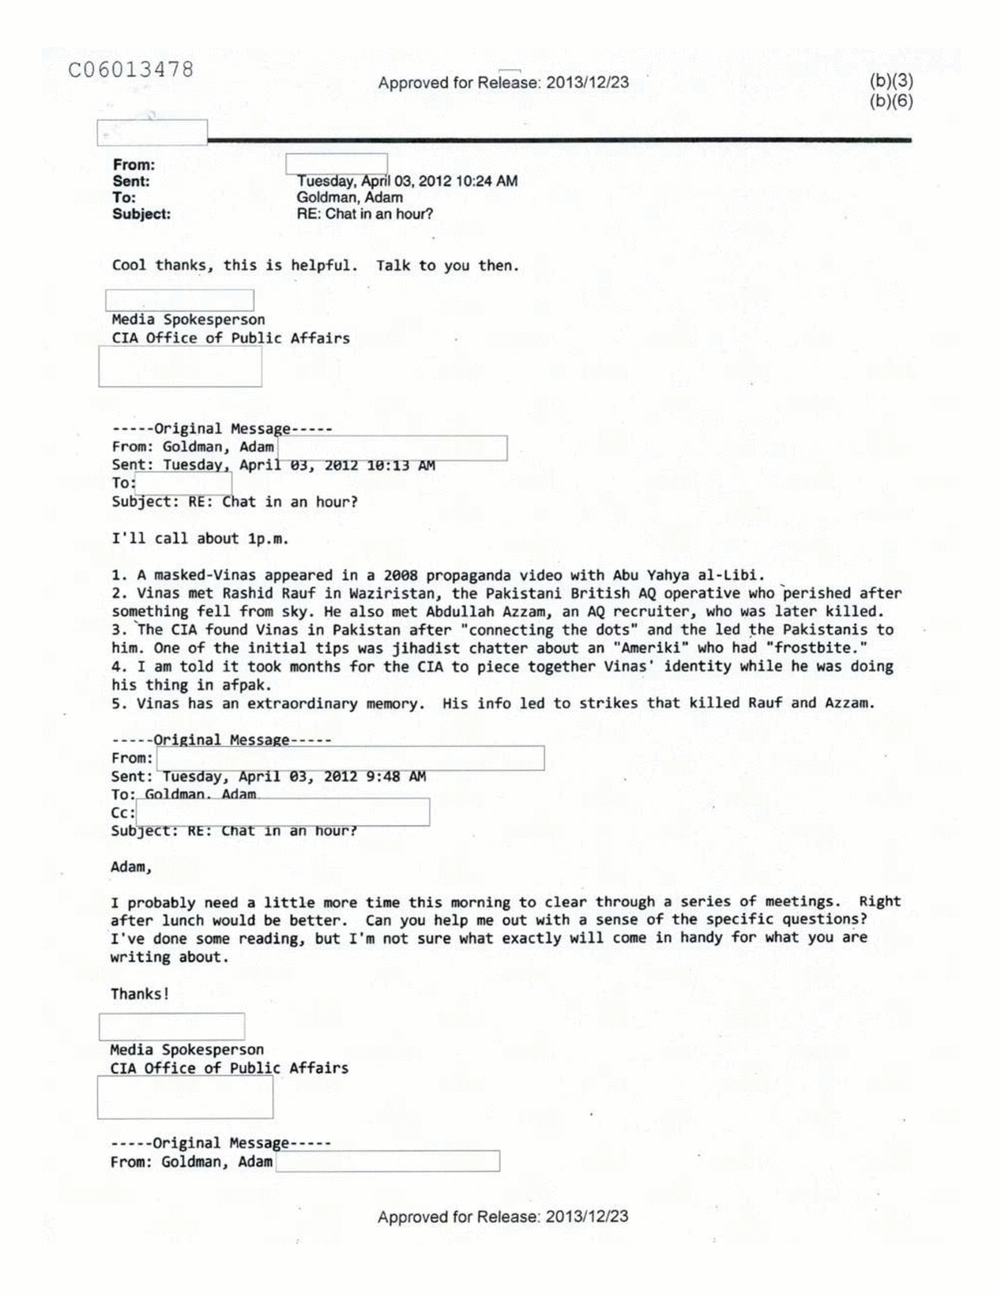 Page 327 from Email Correspondence Between Reporters and CIA Flacks